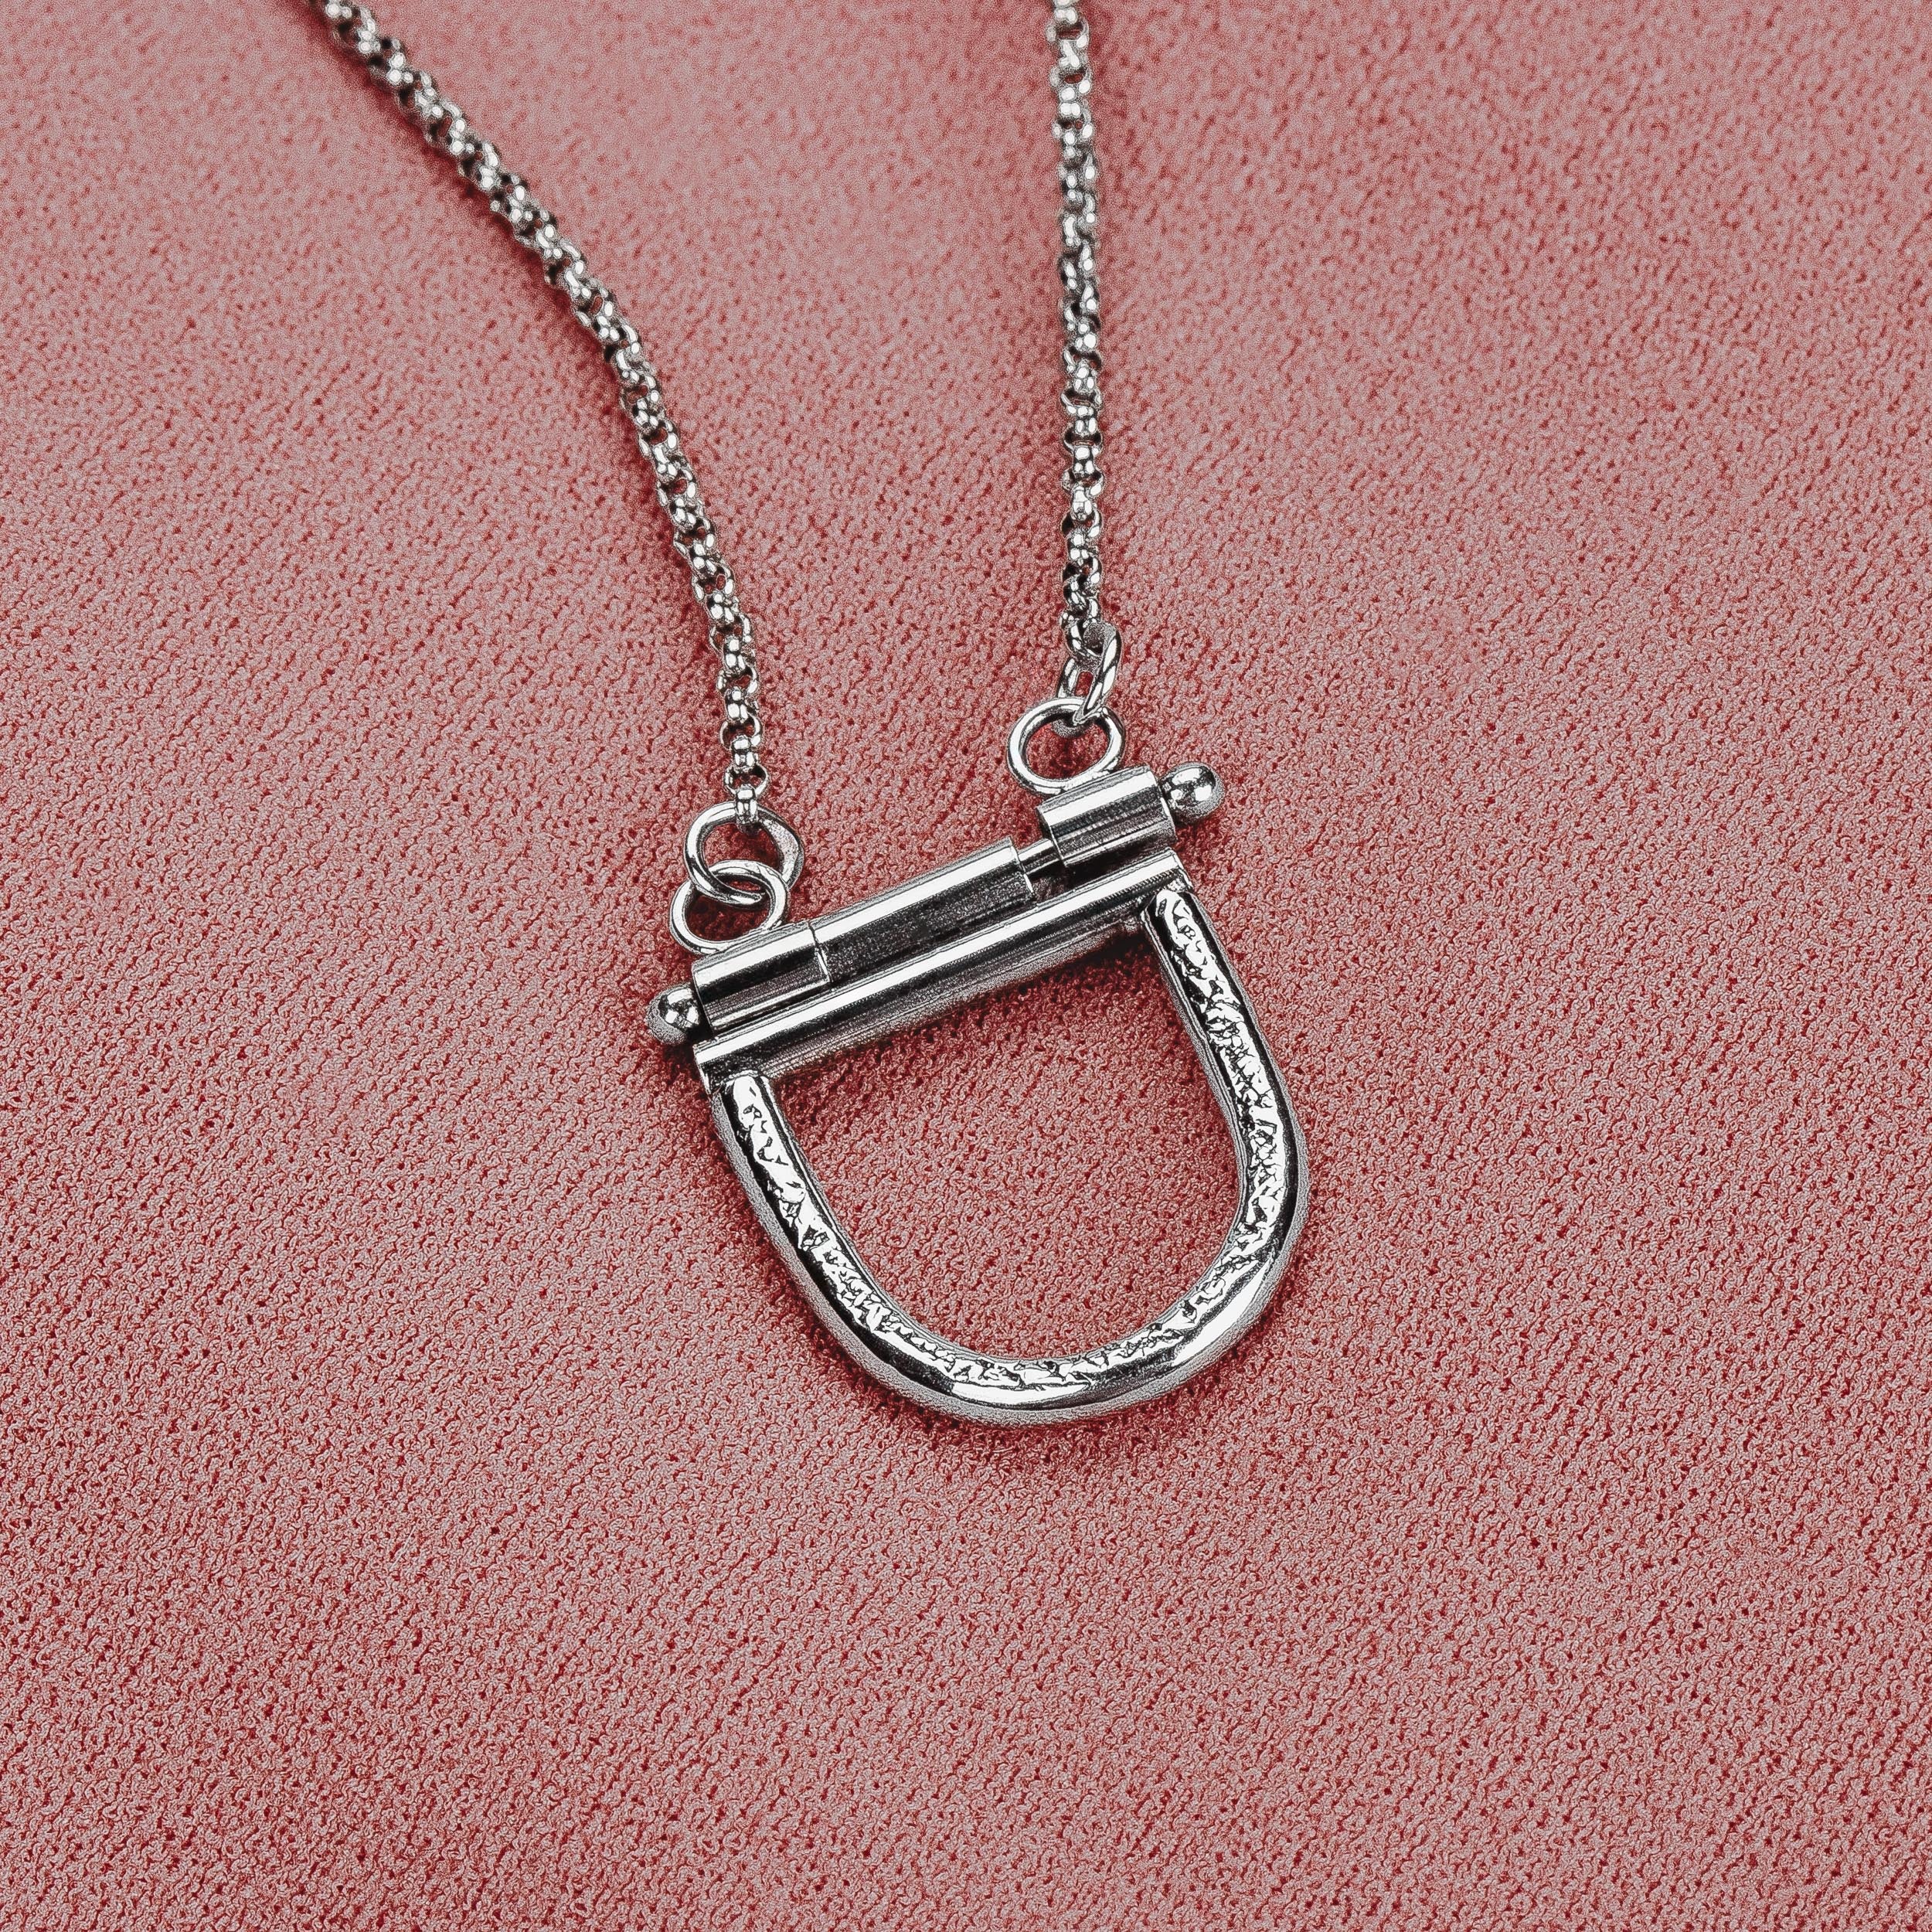 The Arch Necklace